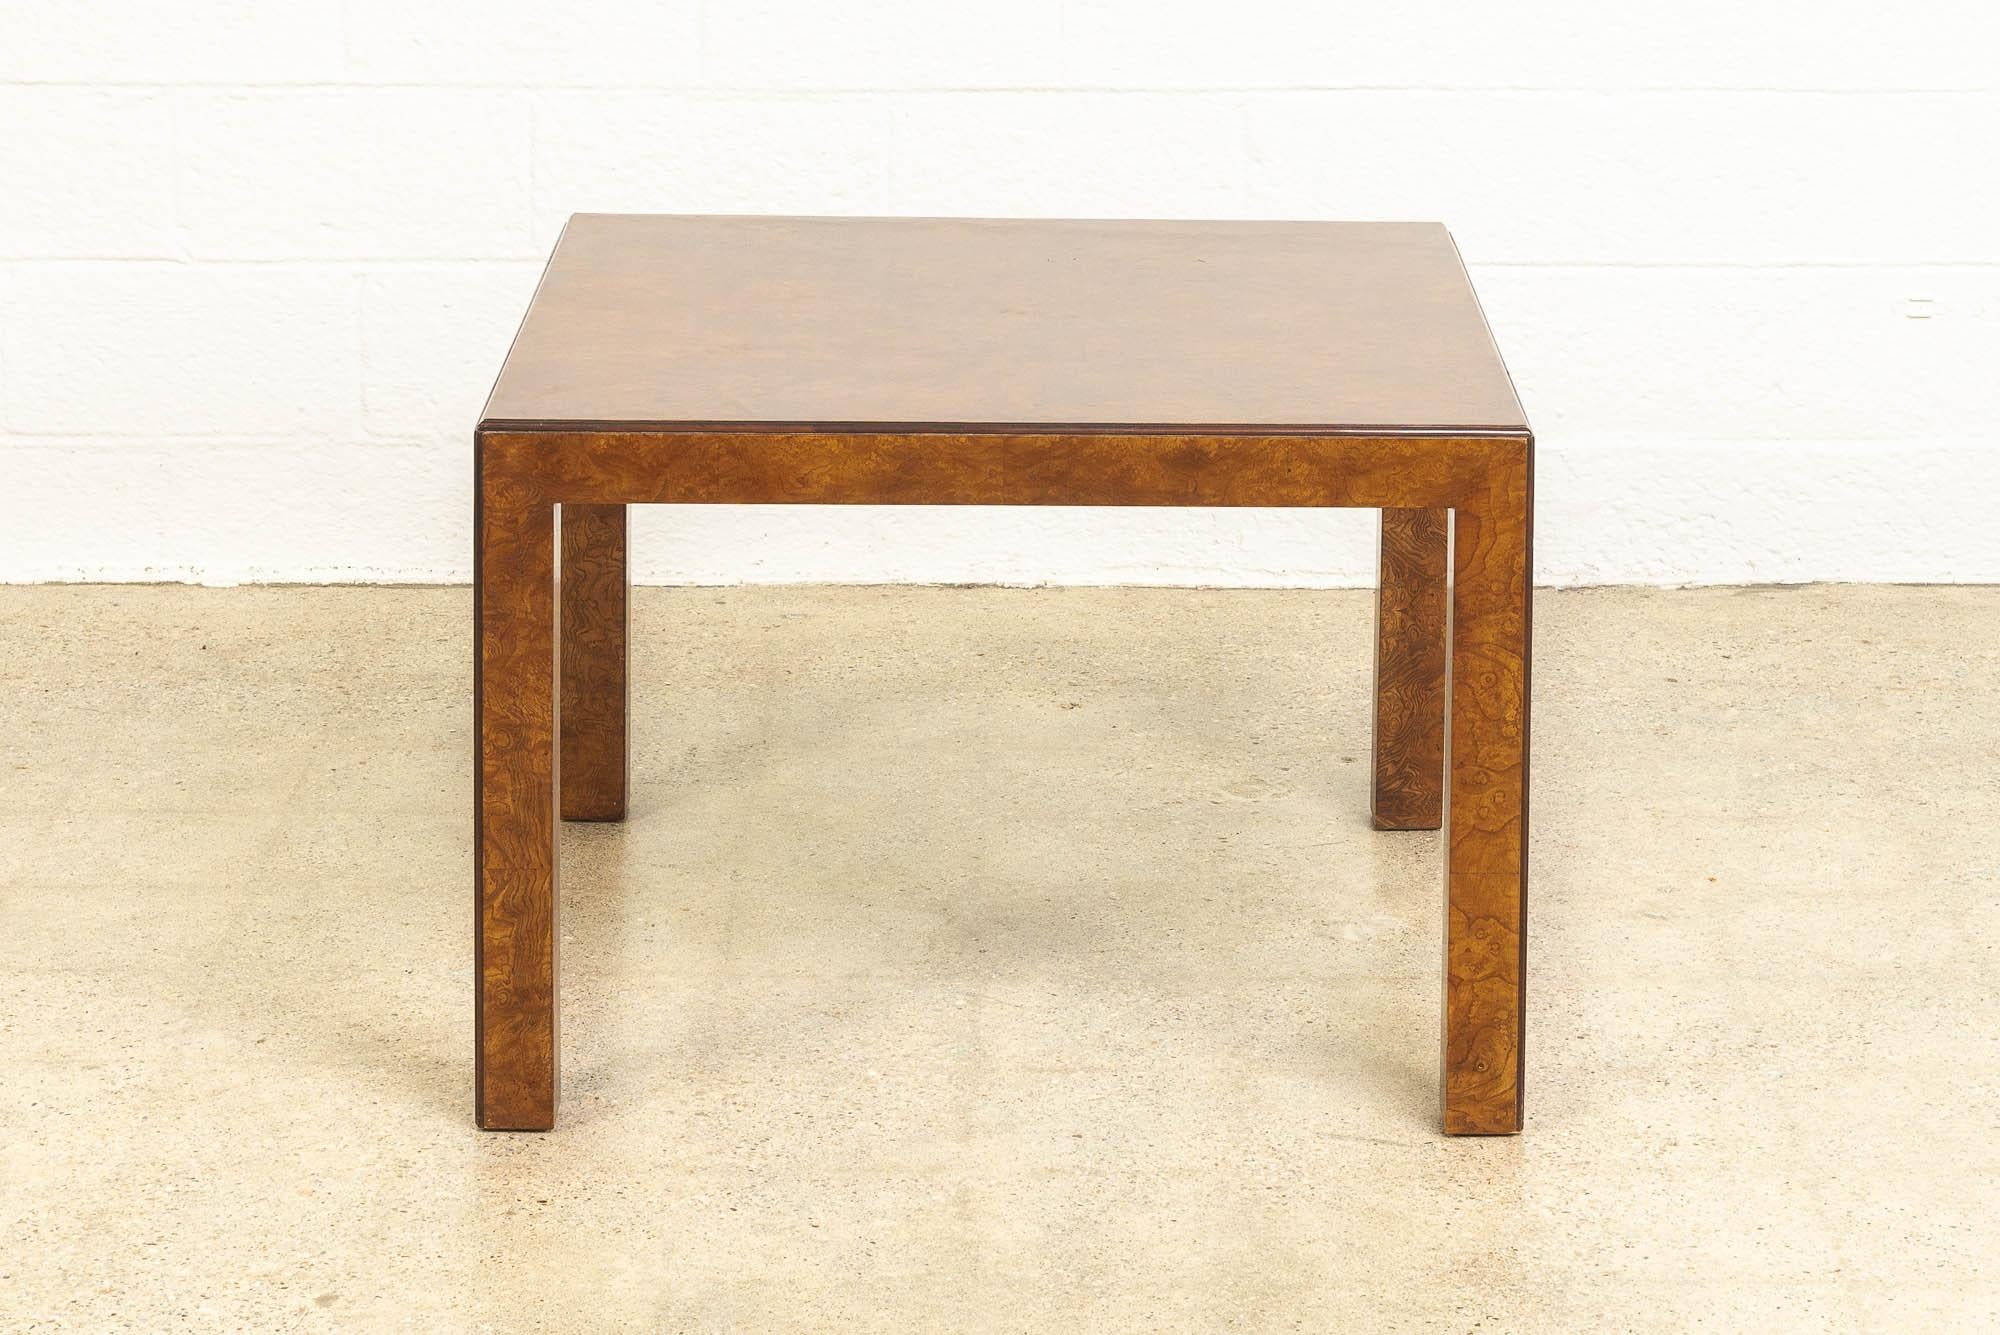 This Mid-Century Modern John Widdicomb Square burl wood coffee table circa 1970 features a Classic Minimalist design with clean geometric lines. The table is well-constructed from solid burl wood and the elegant unimposing design features a gorgeous